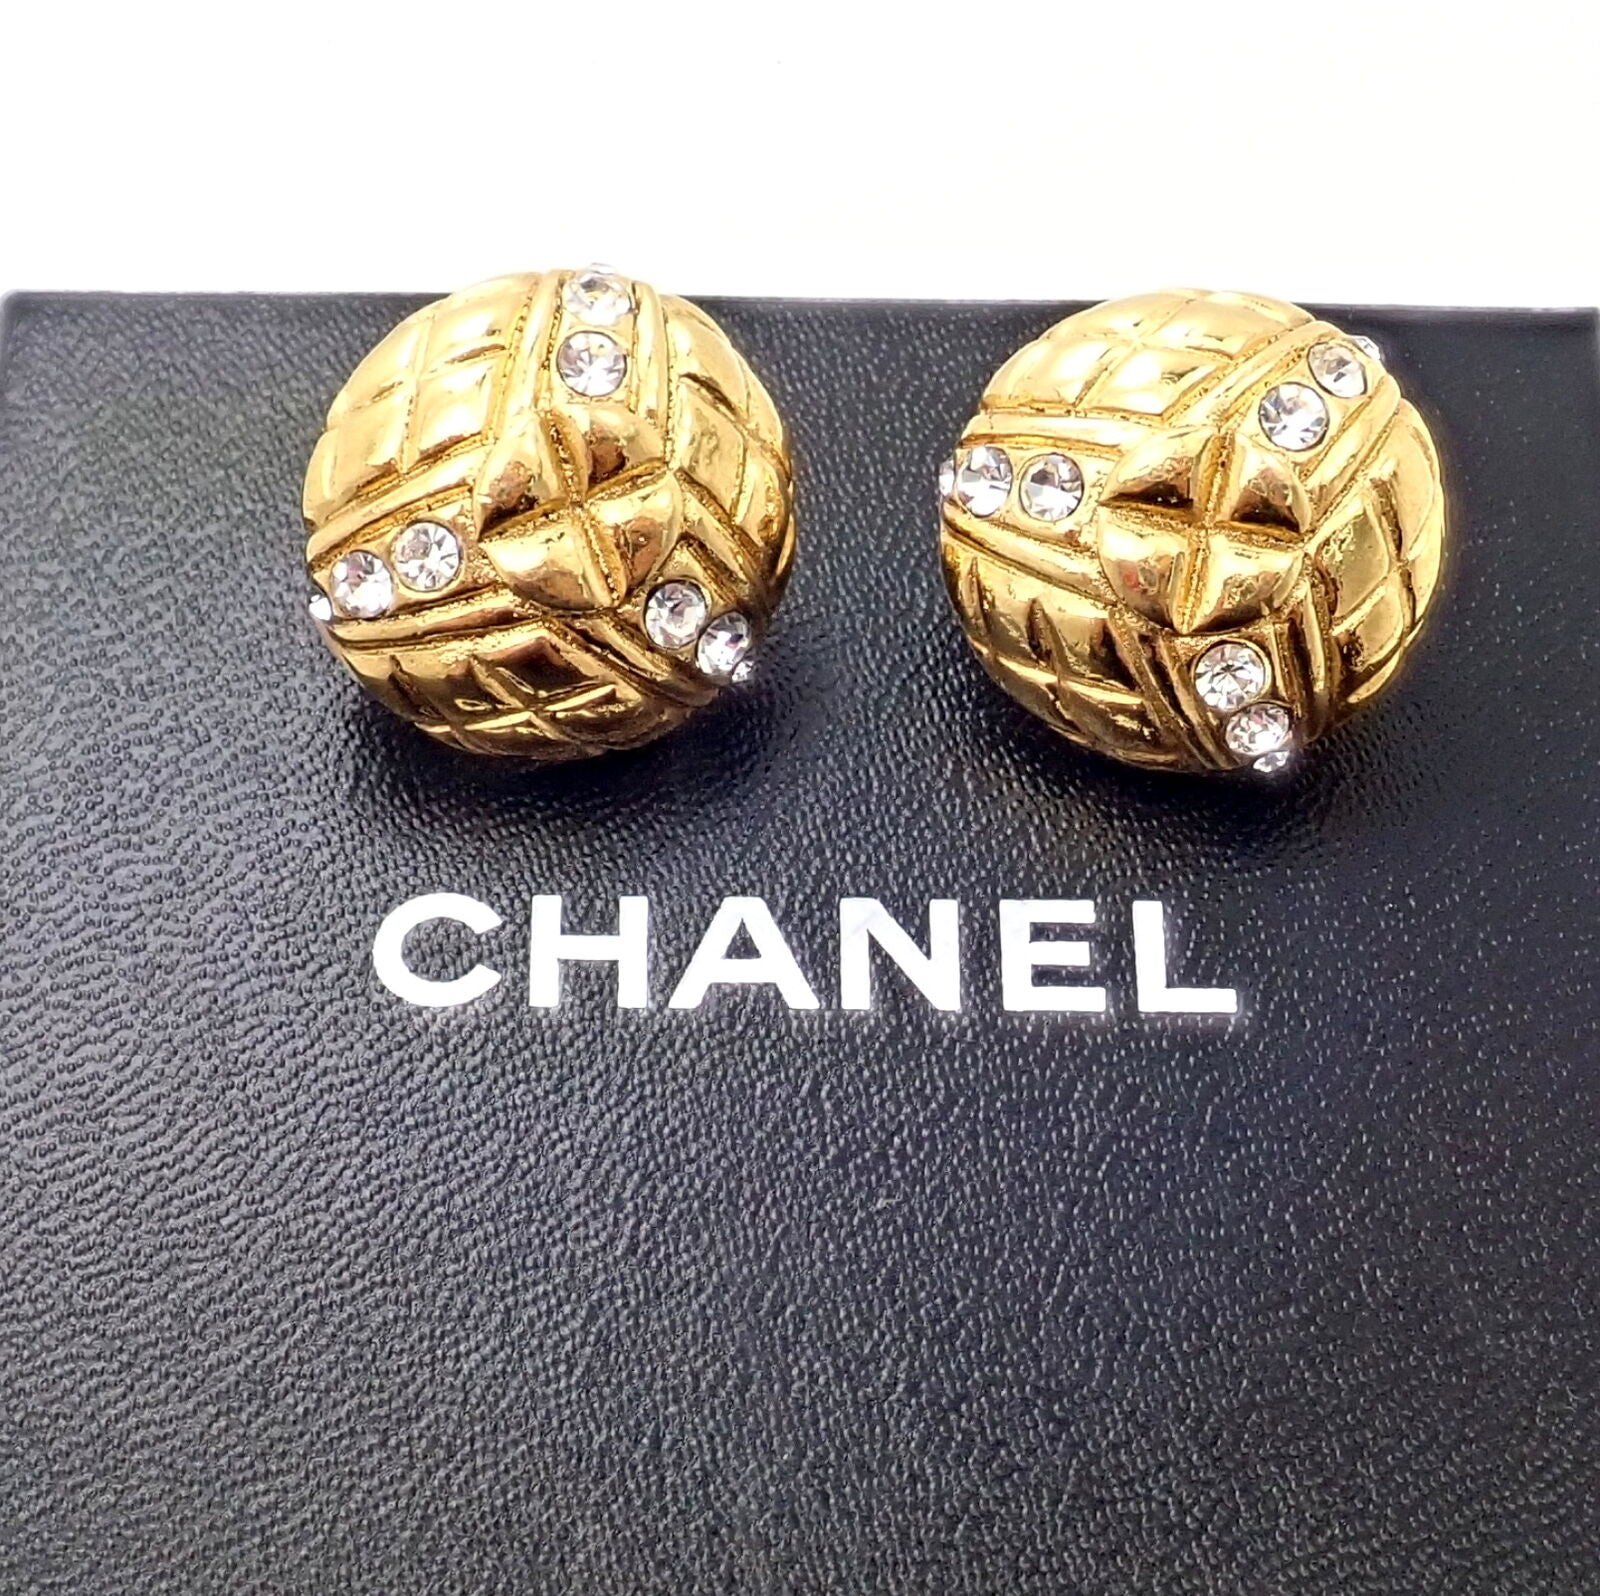 Rare Chanel Vintage Jewelry Designed by Karl Largerfeld Up for